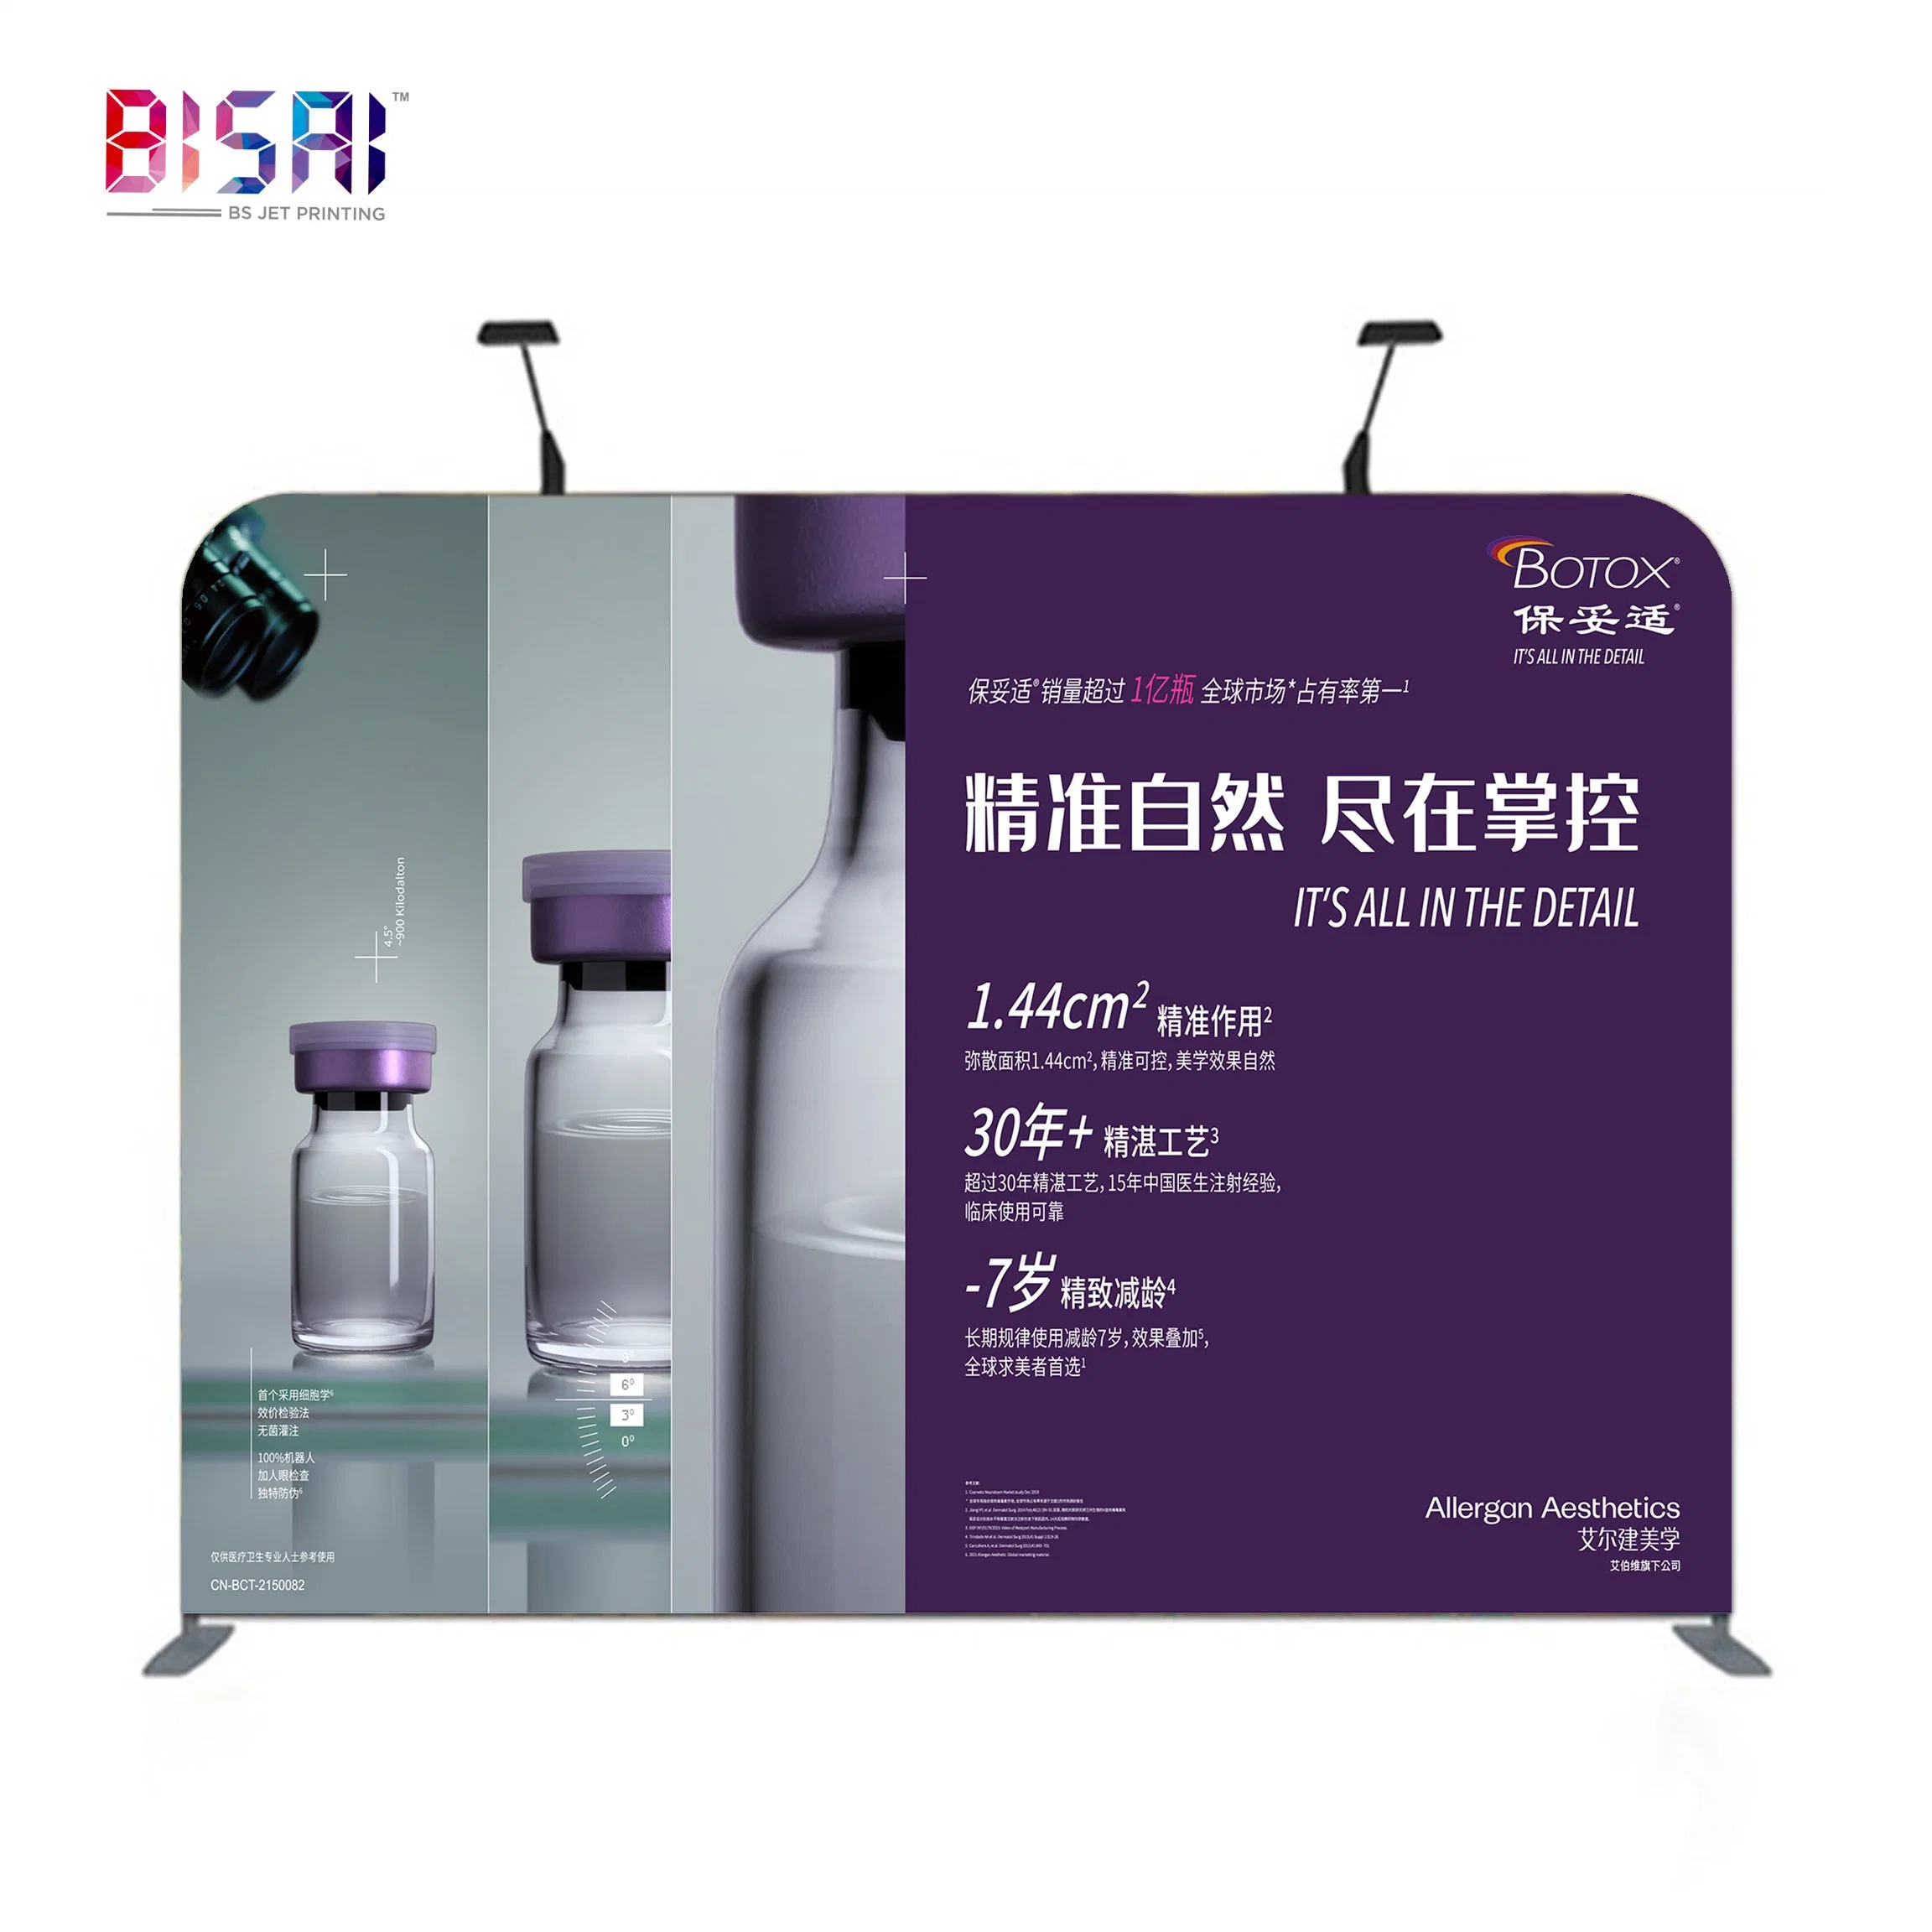 Custom Exhibition Advertising Display Pop up Tension Fabric Show Act Fast Trade Show Stand Banner Ts230